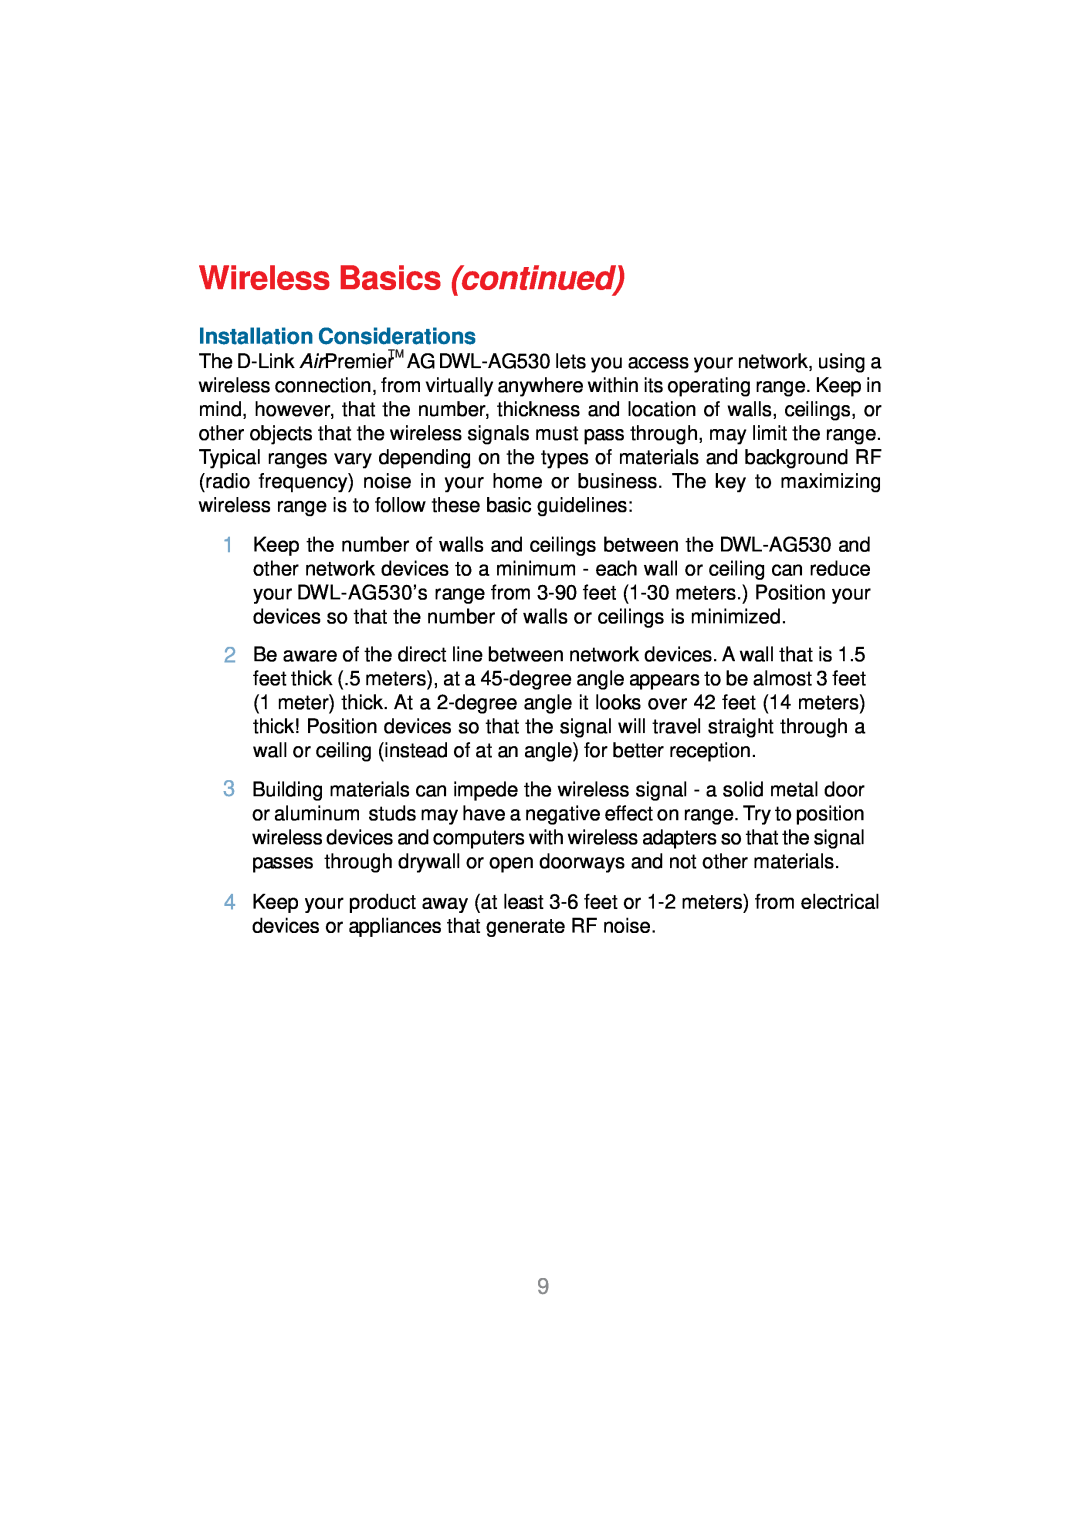 D-Link DWL-AG530 manual Installation Considerations, Wireless Basics continued 